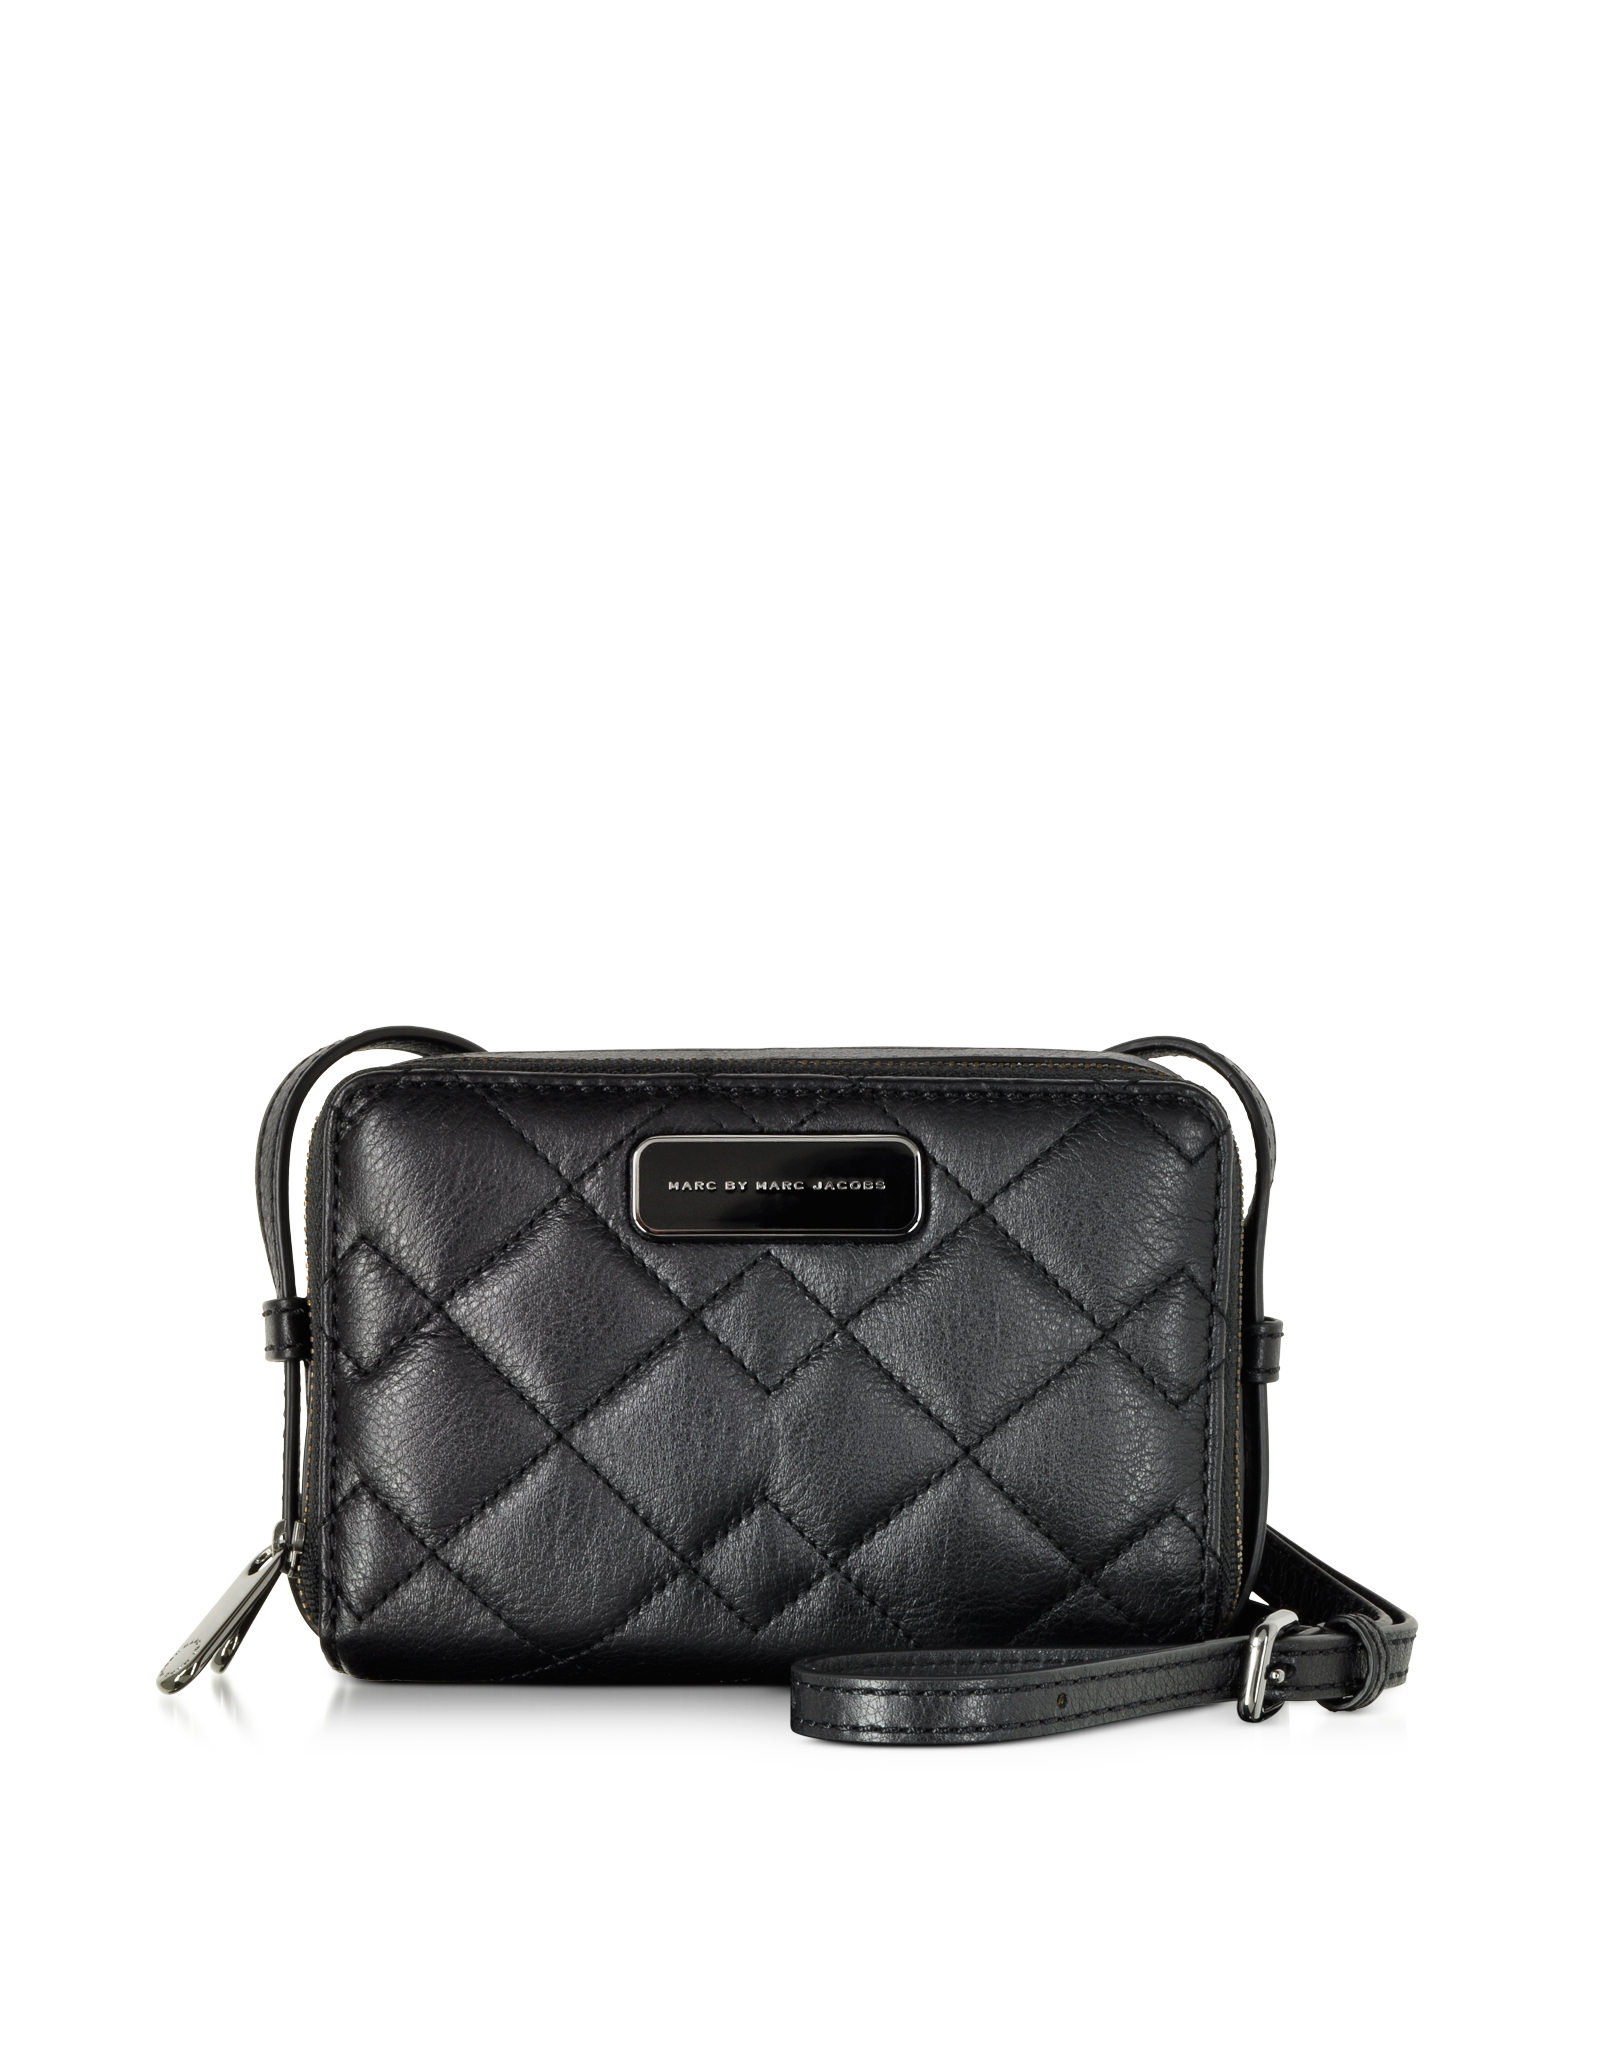 Marc by marc jacobs Sophisticato Black Quilted Leather Crossbody Bag in Black | Lyst